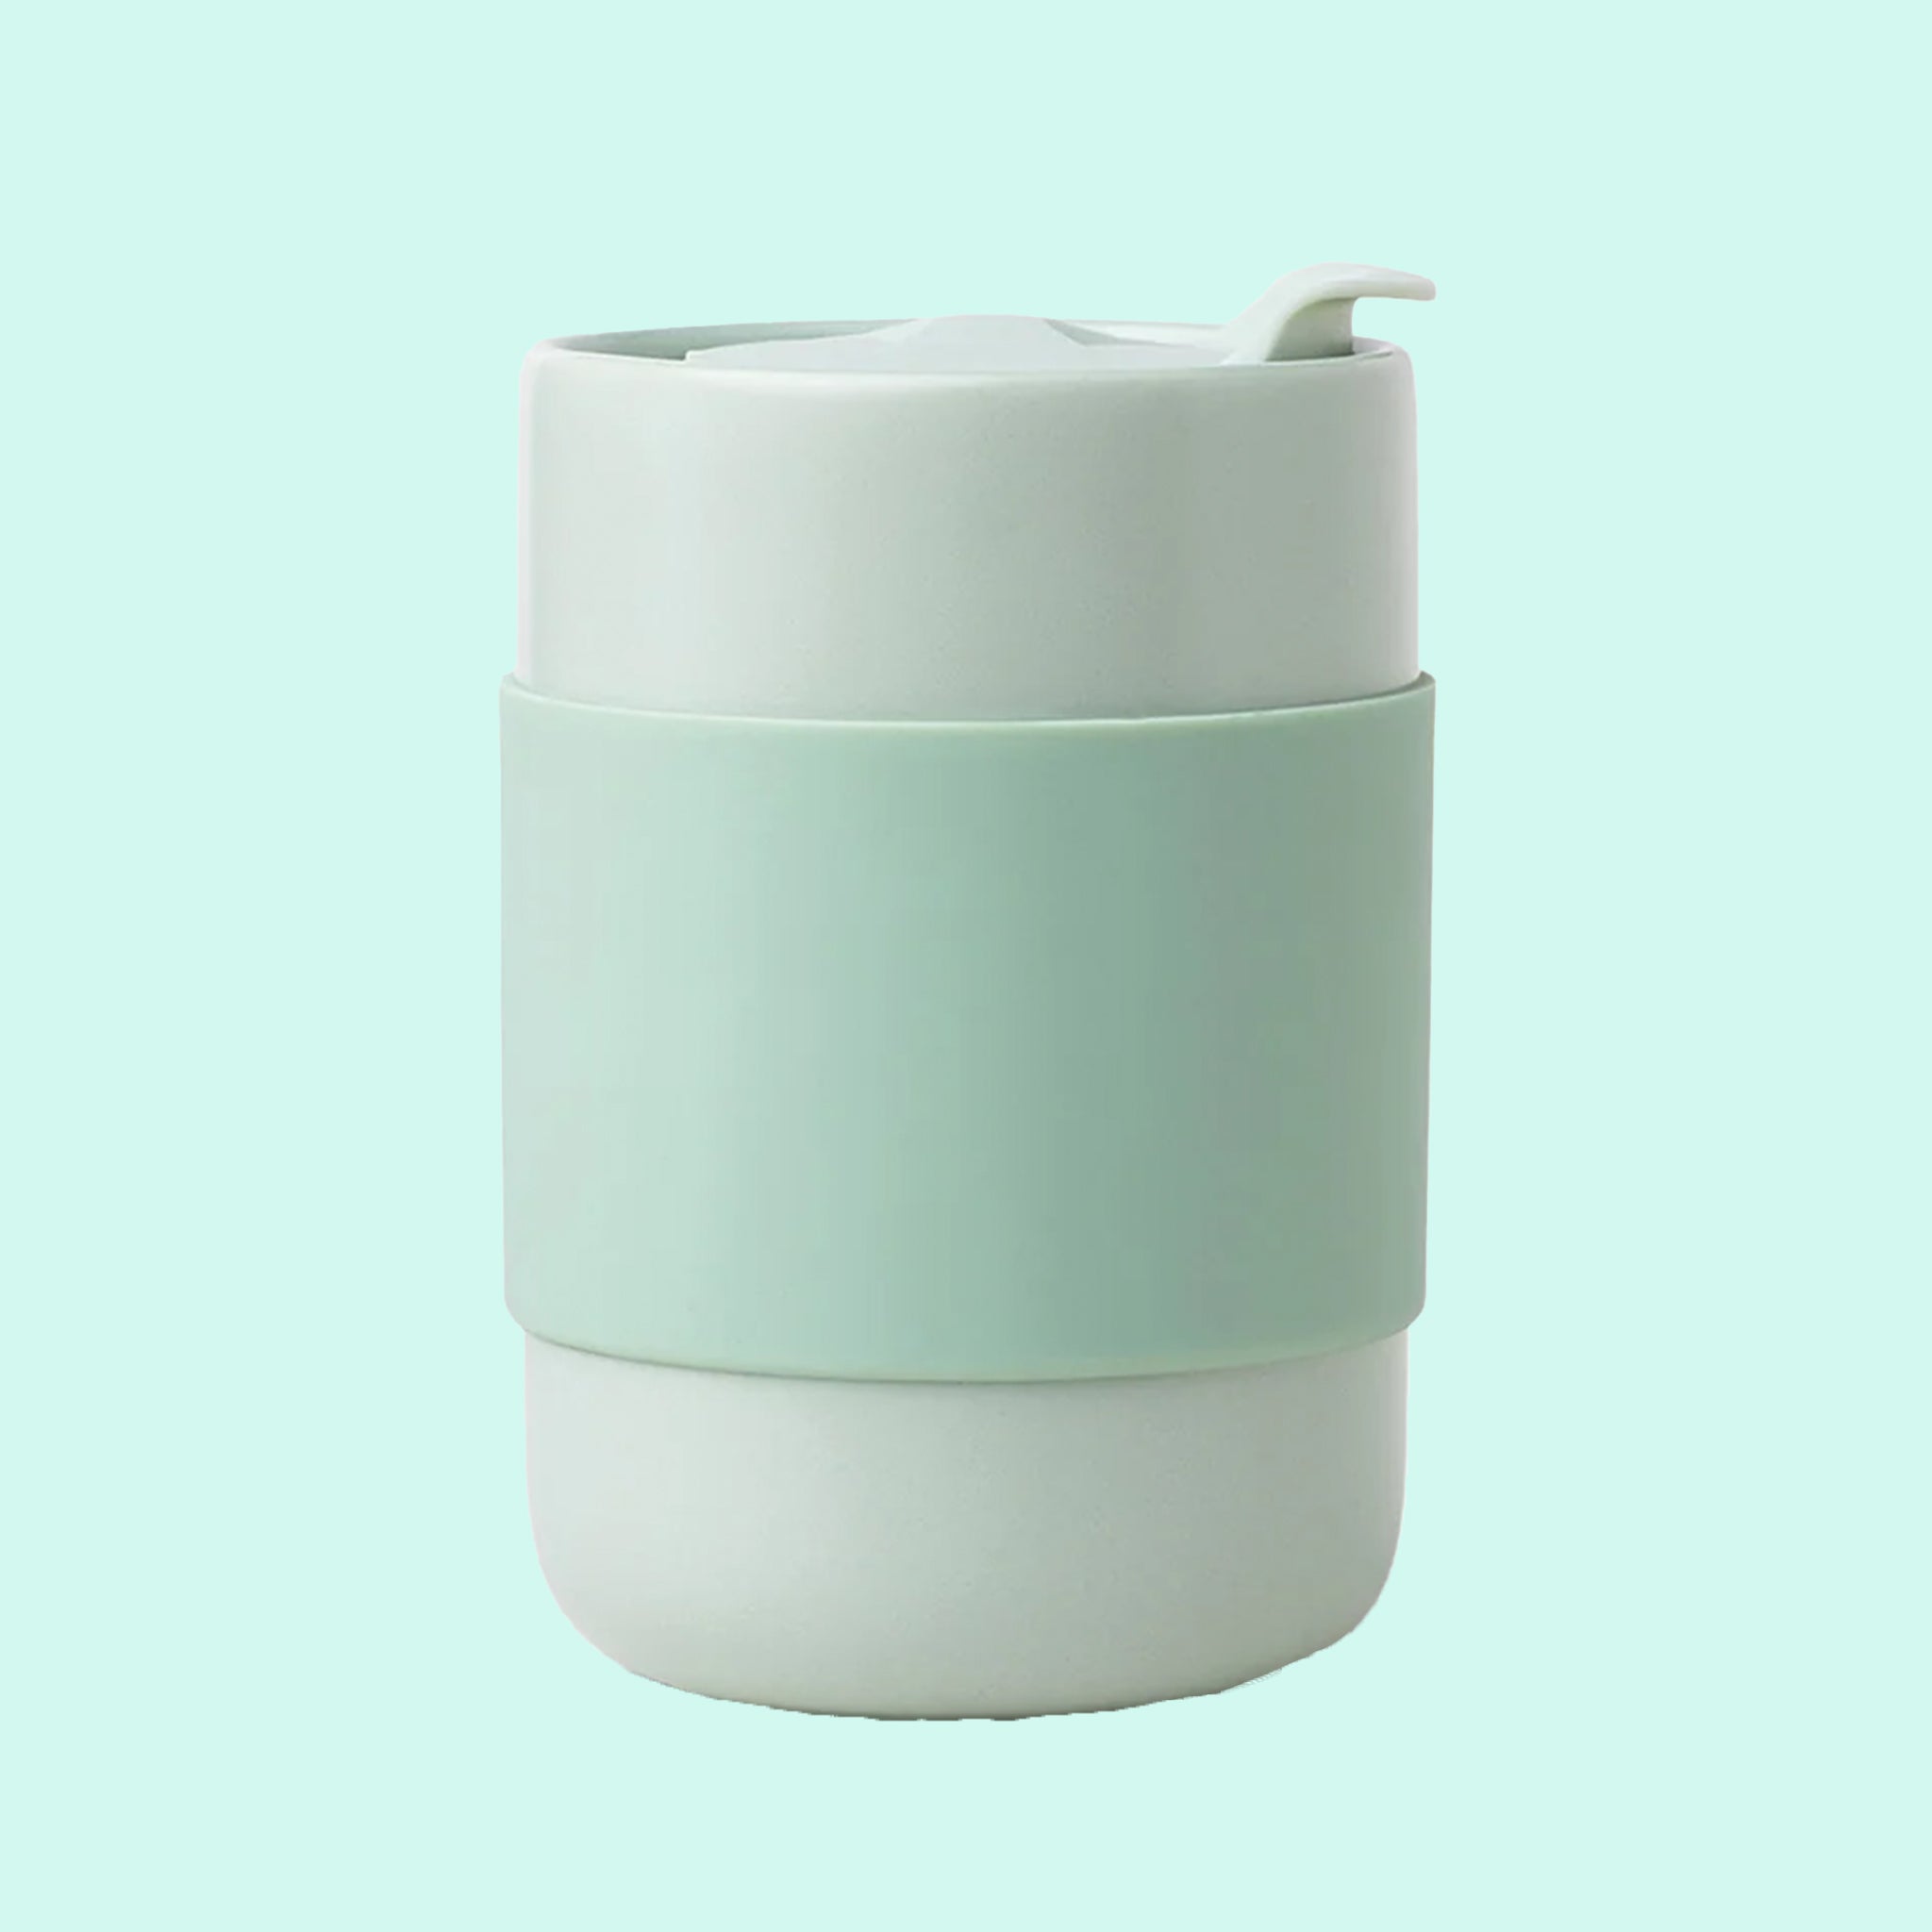 On a mint green background is a mint green ceramic tumbler with a silicone sleeve. 